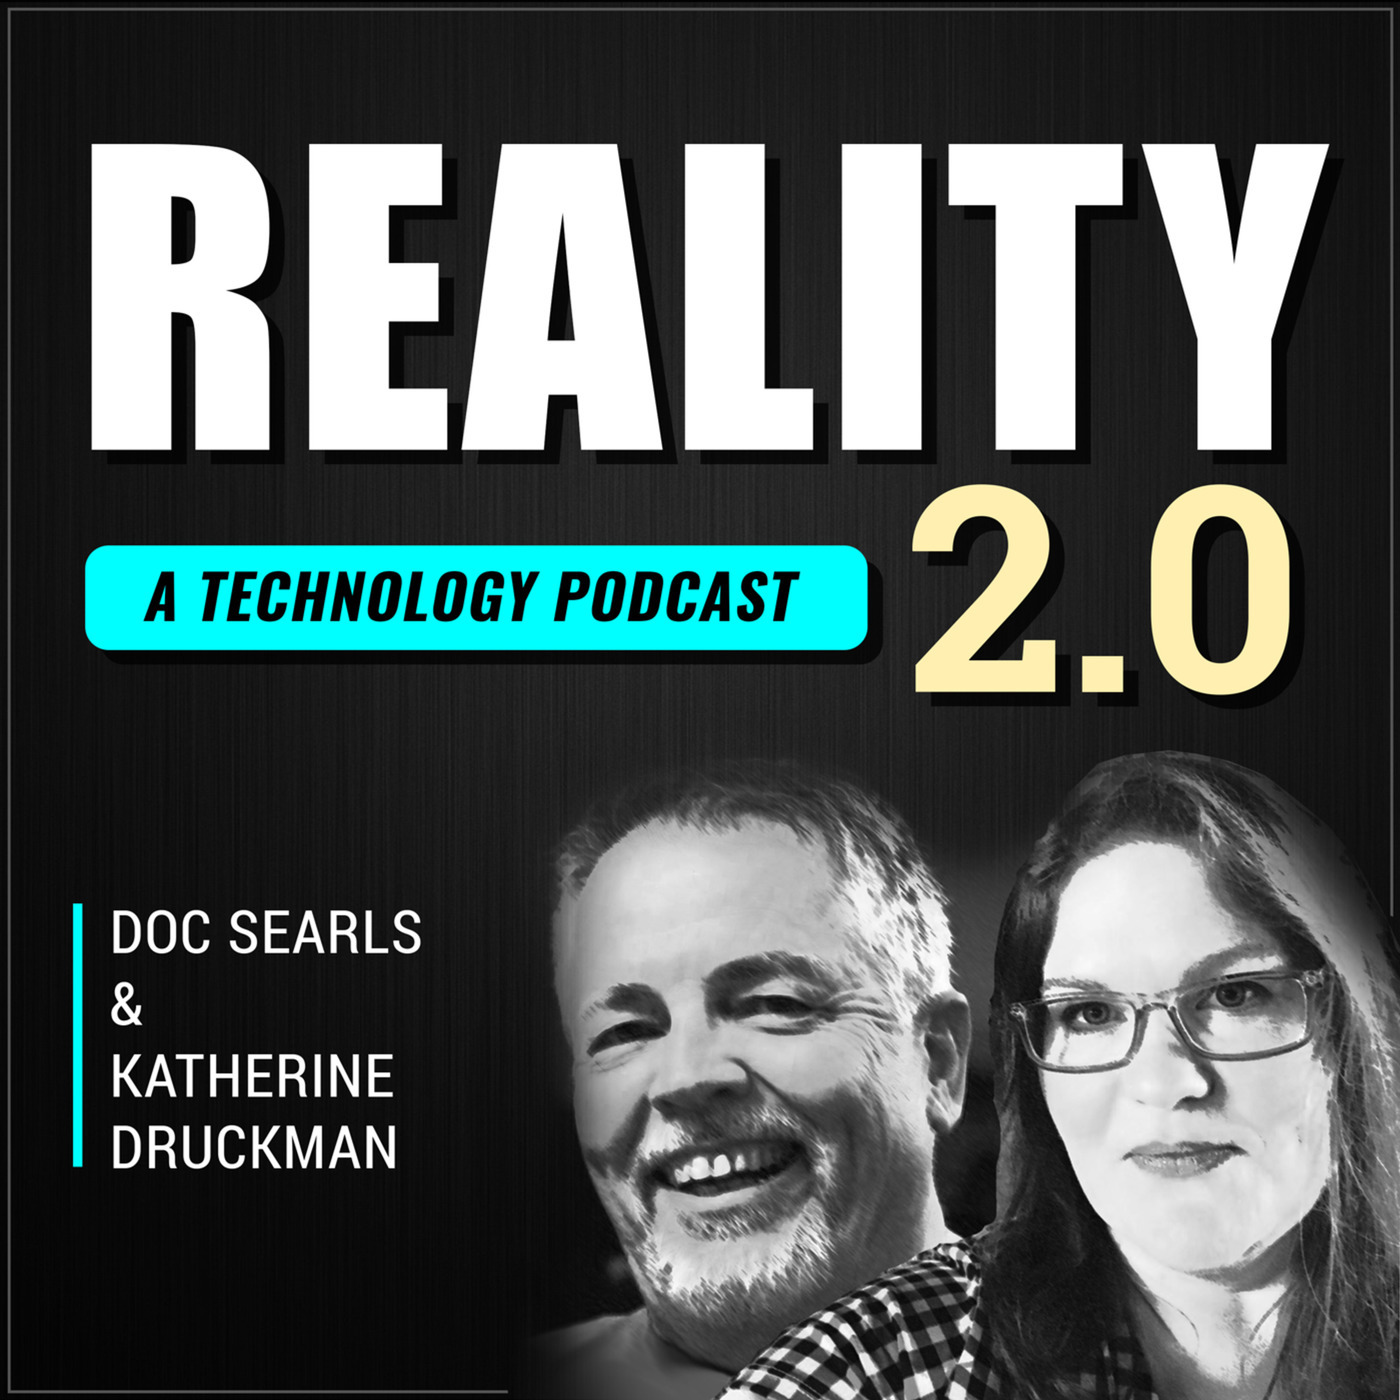 Reality 2.0 Episode 98: You Win Some, You Lose Some (Billions)